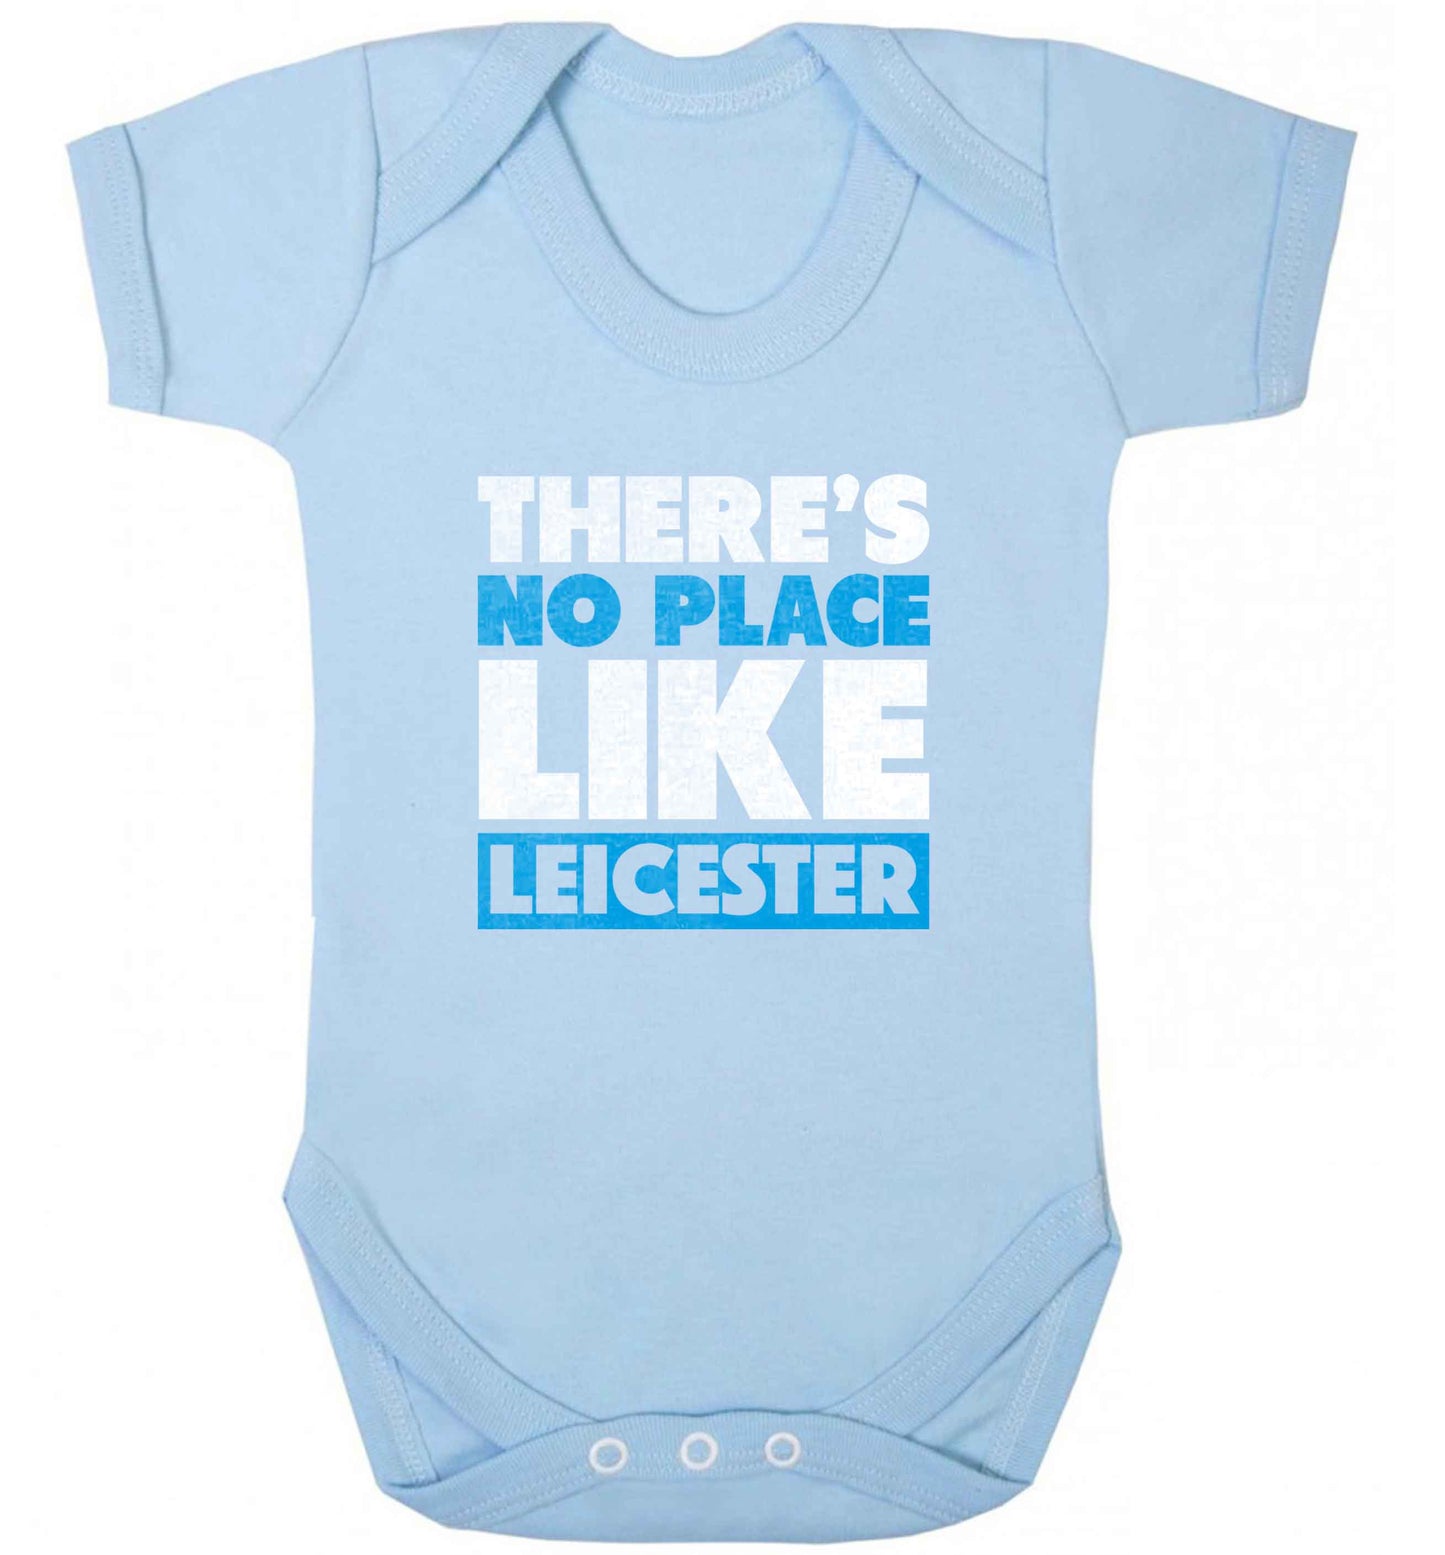 There's no place like Leicester baby vest pale blue 18-24 months